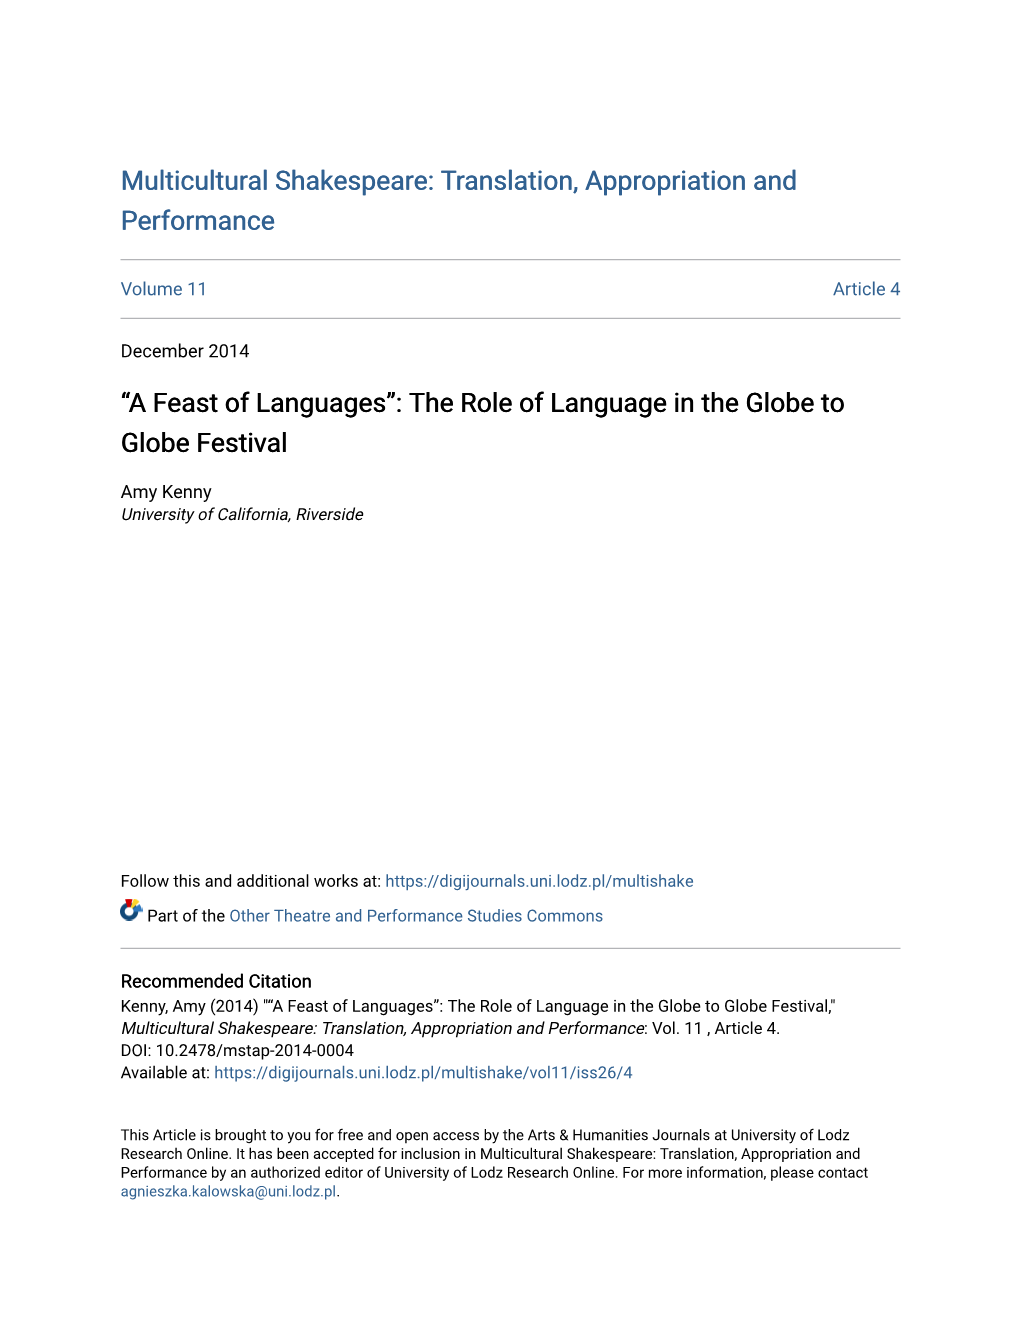 The Role of Language in the Globe to Globe Festival